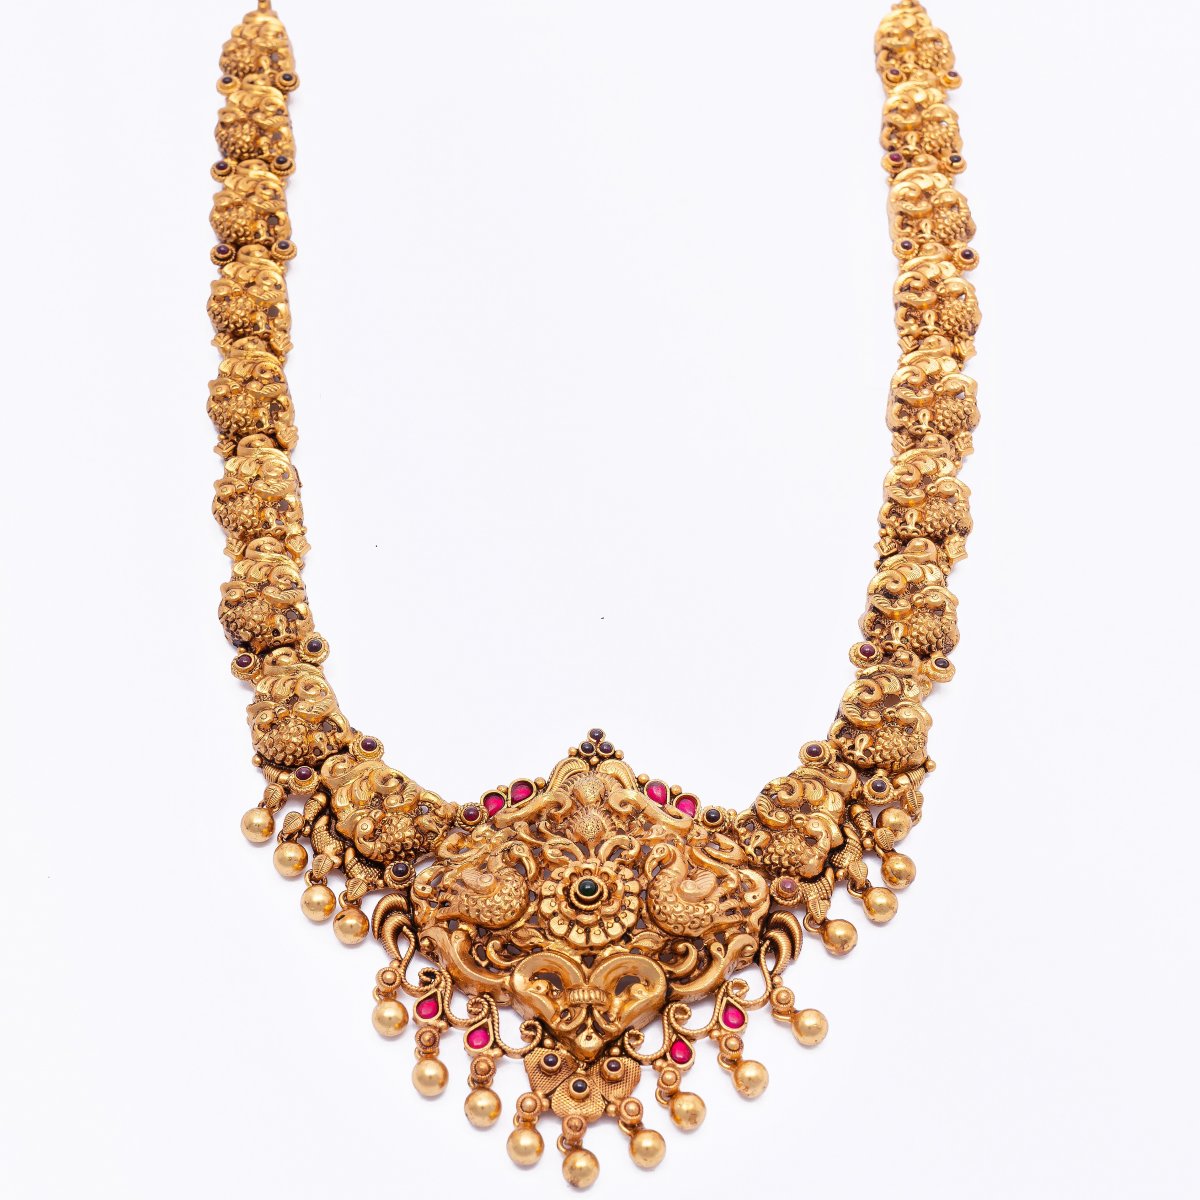 GOLD PLATED TRADITIONAL SOUTH INDIAN NECKLACE FOR LADIES 